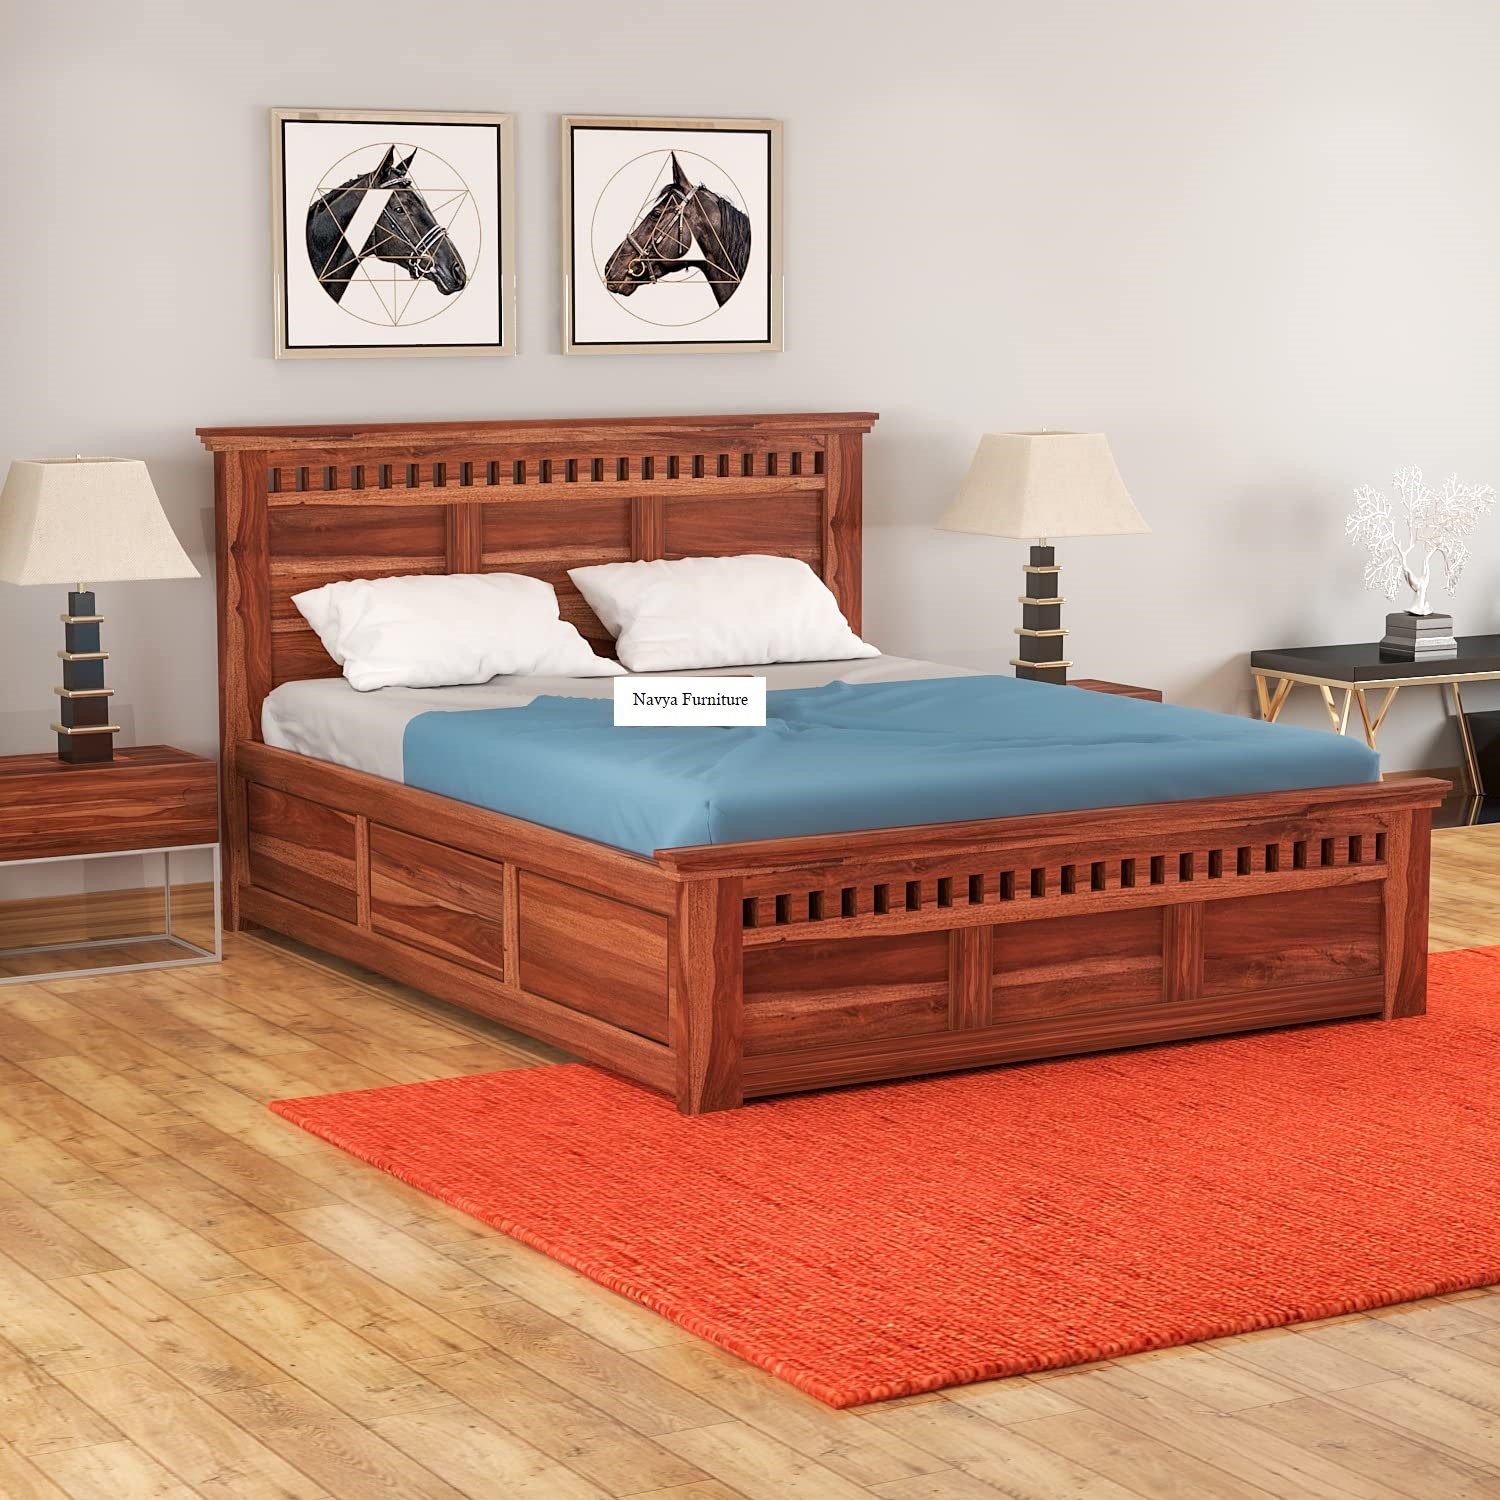 Solid Wood King Size Bed with Storage for Bedroom In Honey Finish » Buy  Wooden Furniture Online at Best Price